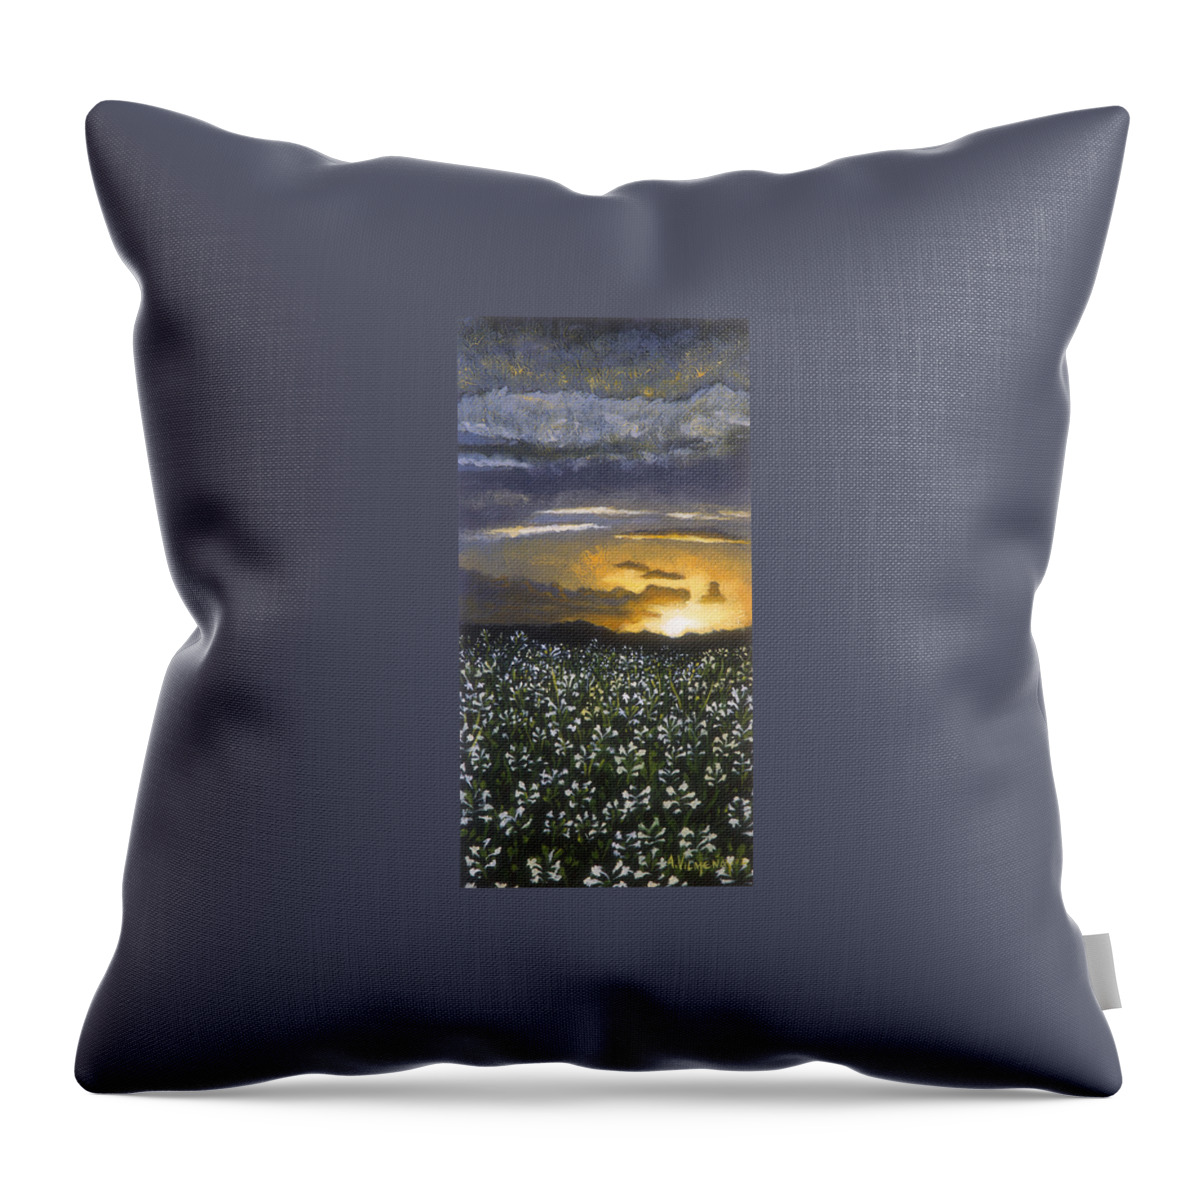 Acrylic Throw Pillow featuring the painting Madonna Lily Valley by Arturo Vilmenay